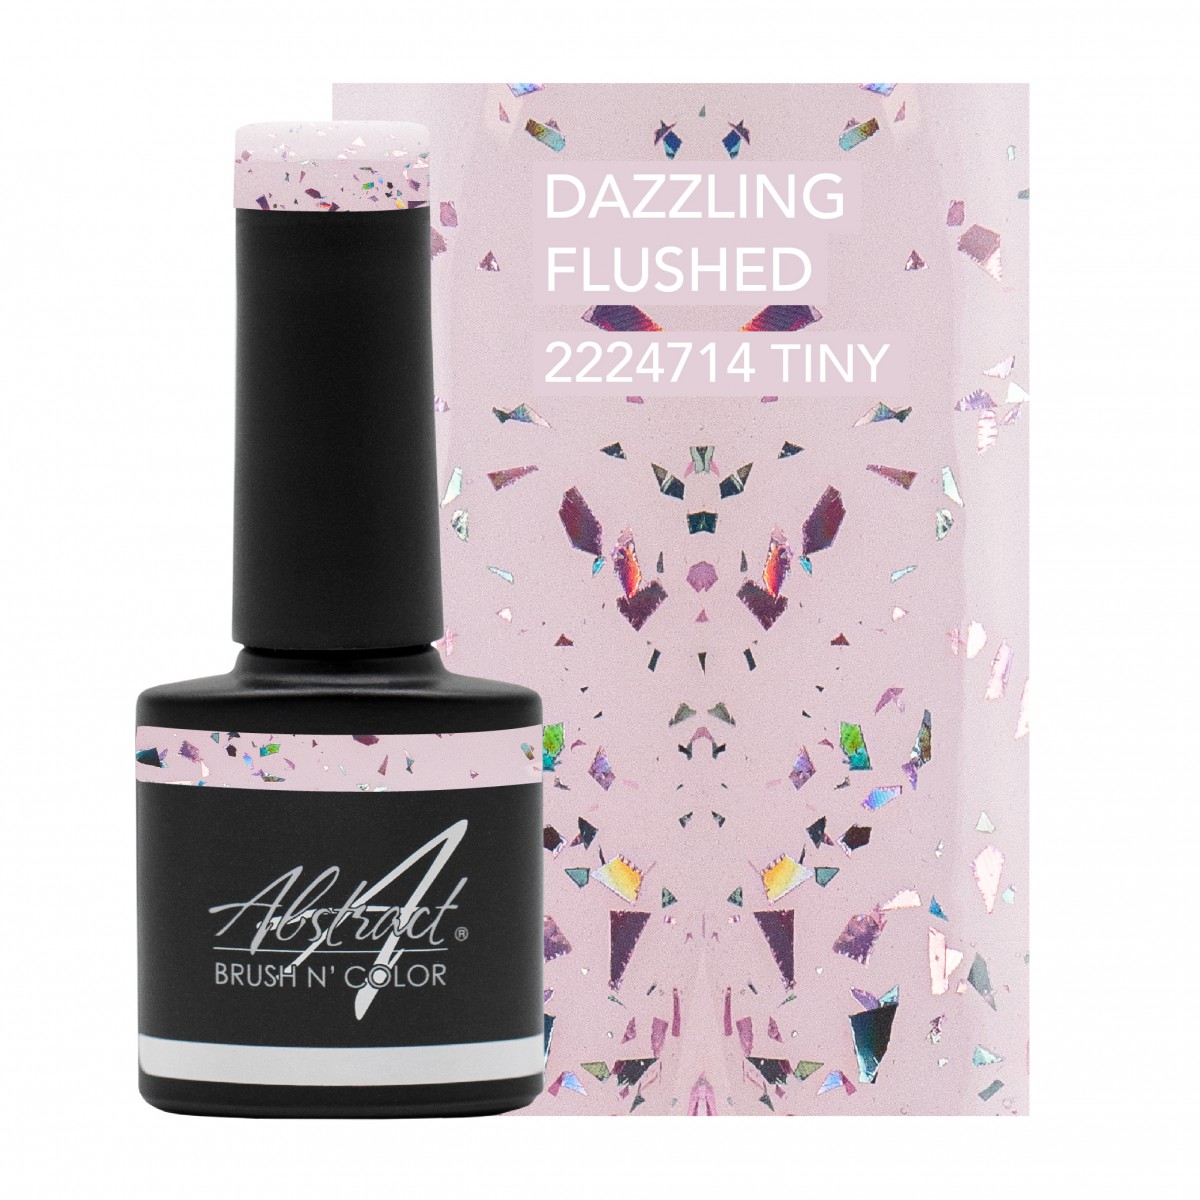 Dazzling Flushed Shield and Sparkle Top Gel Abstract